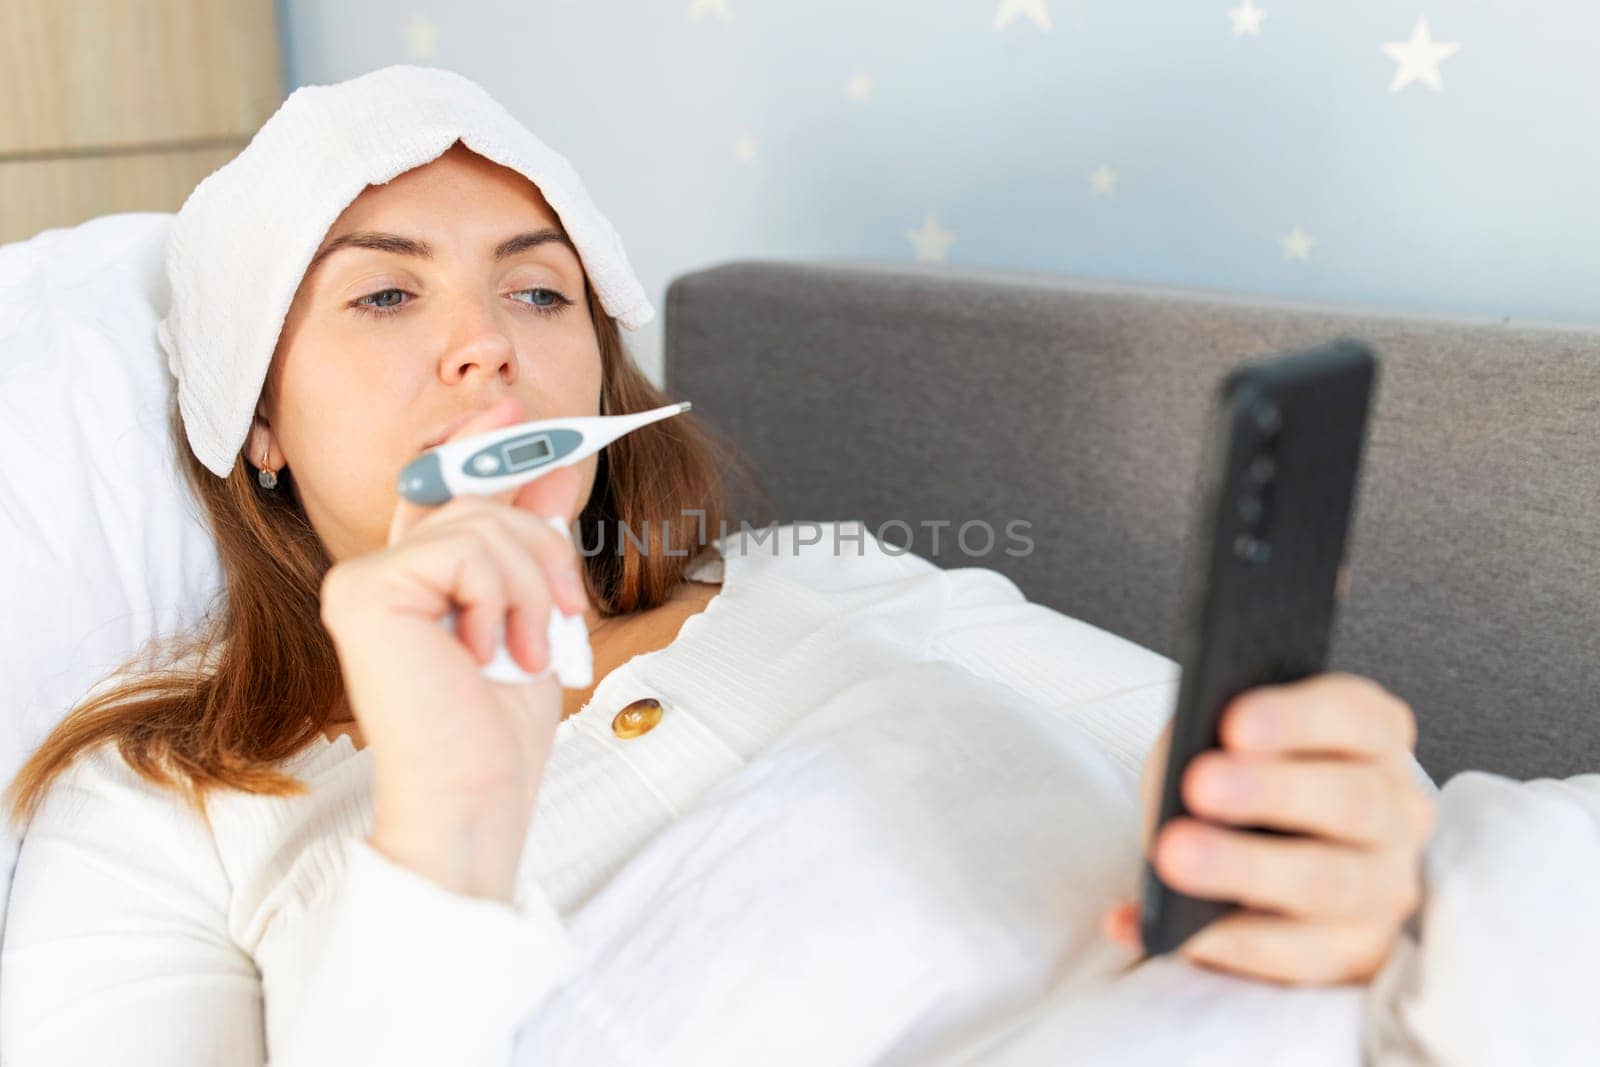 Sick young woman with bad cold, flu or coronavirus fever holding thermometer and talking to telemedicine service doctor. Sick woman having online medical consultation video call.